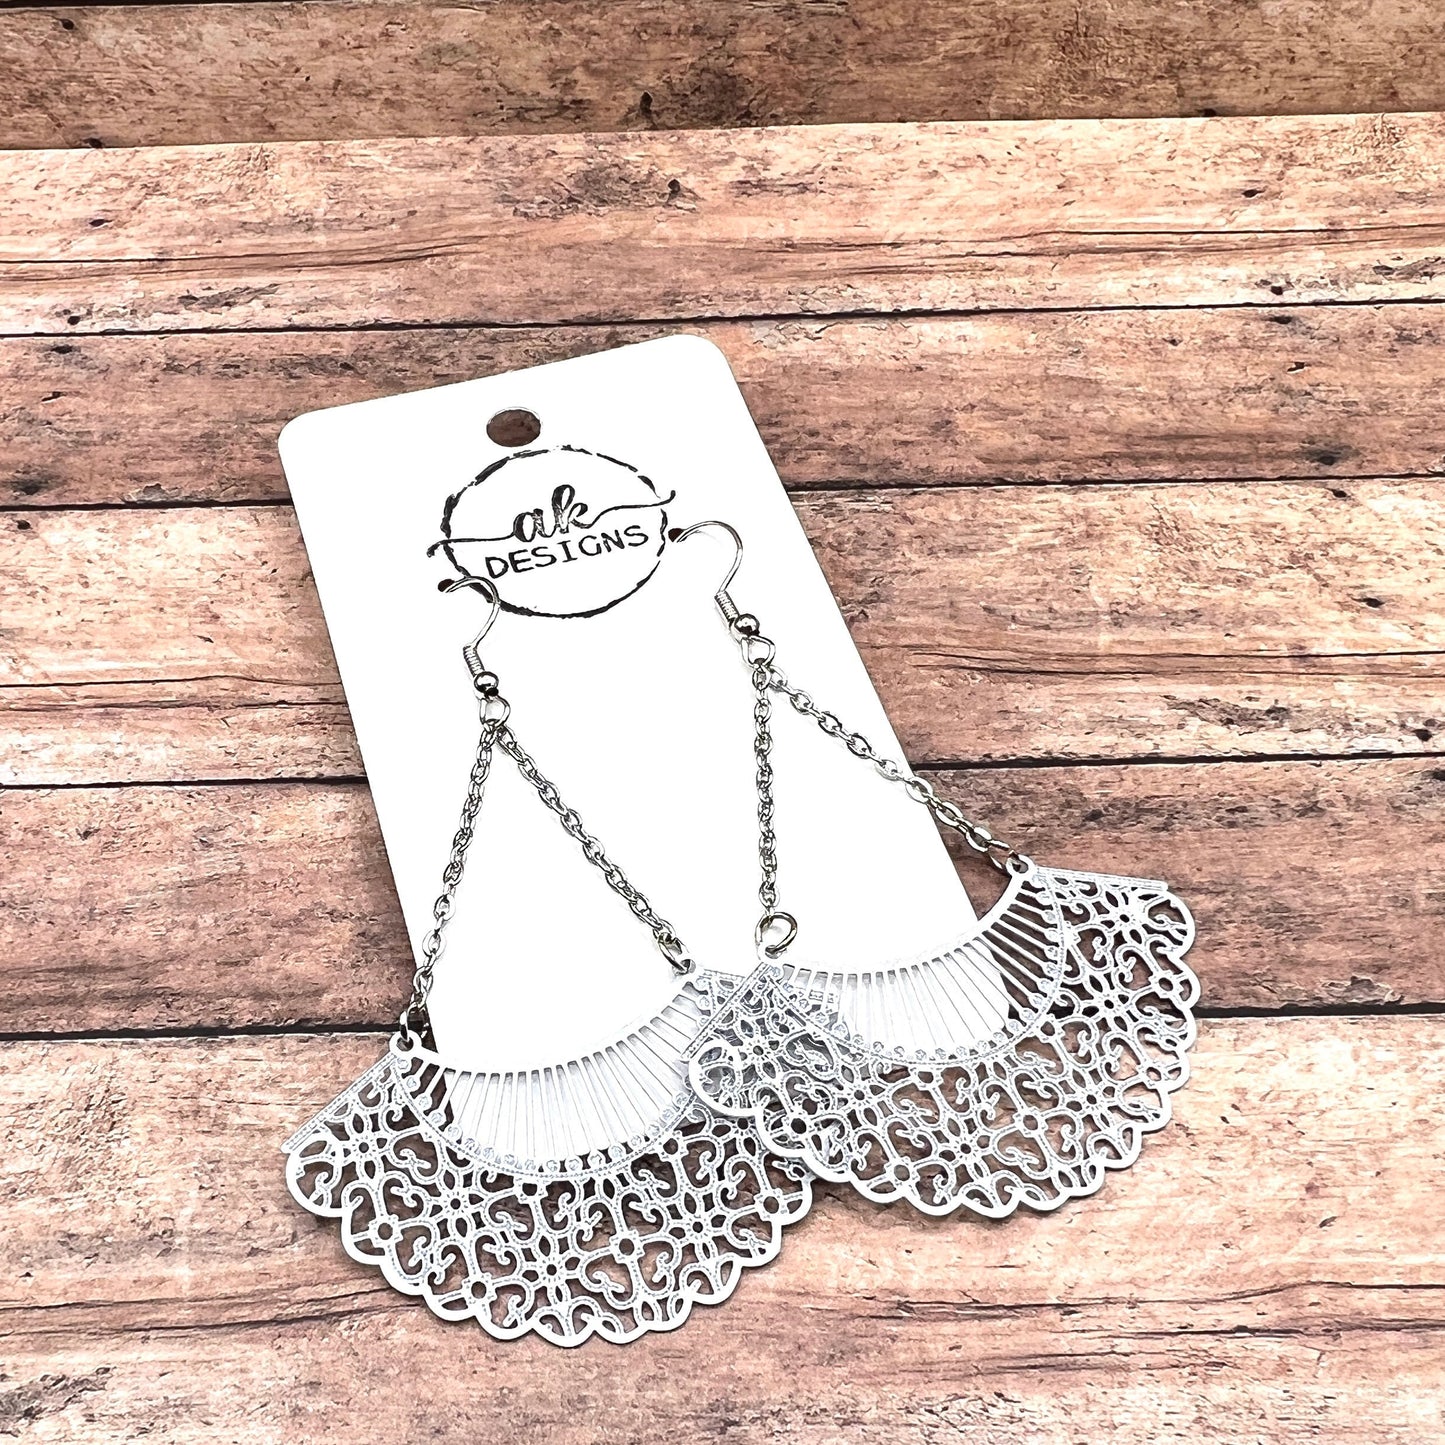 Dissent Lace Collar RBG Inspired Justice Filigree  Earrings